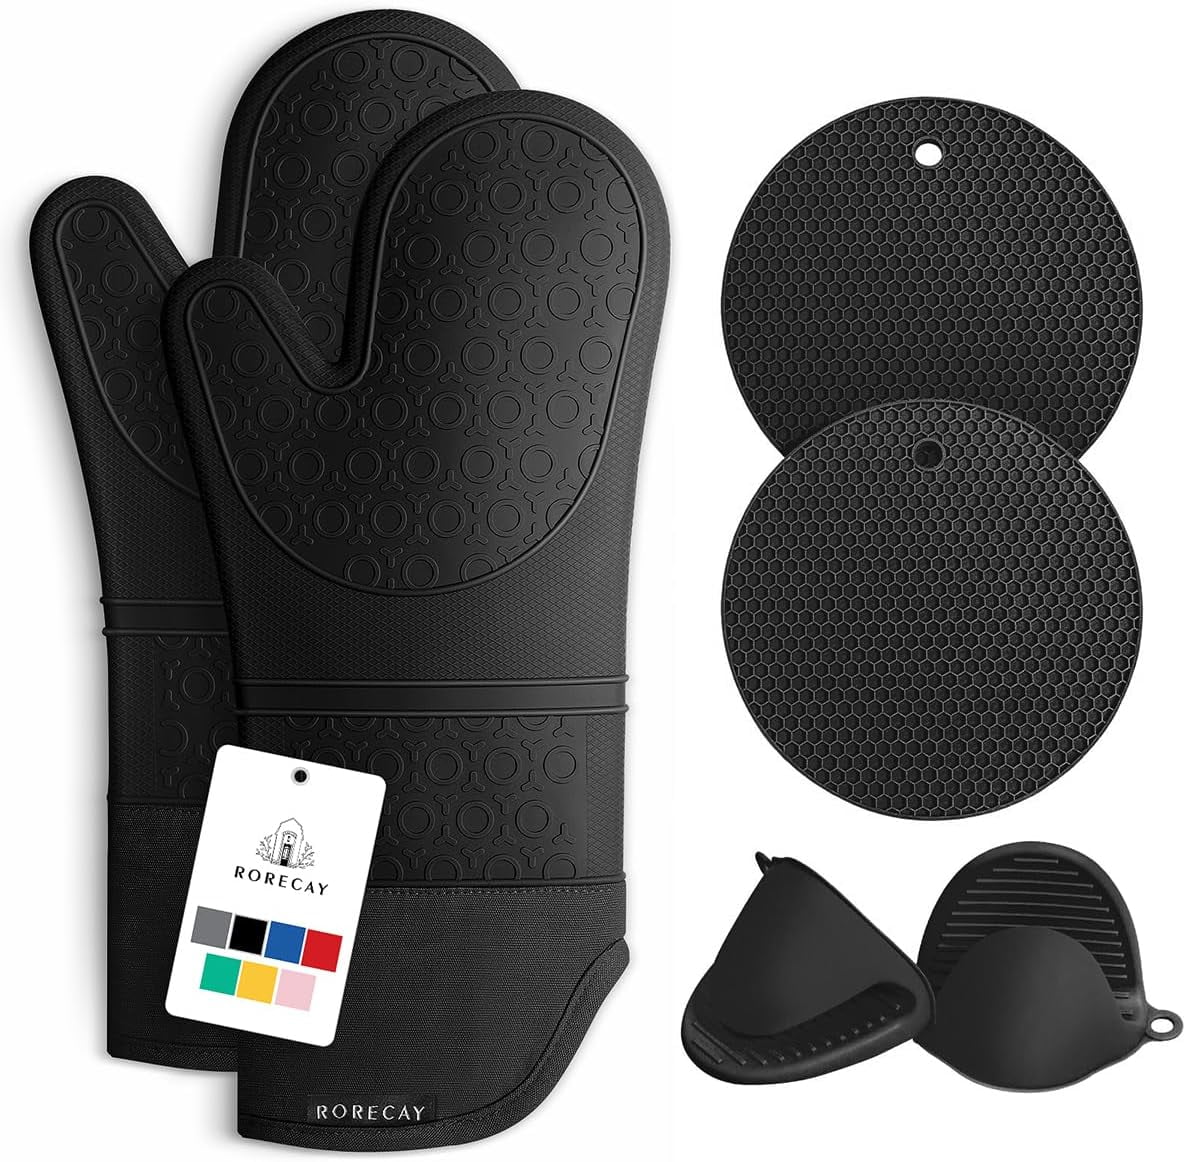 A Set Of 6 Silicone Oven Mitts, 1 Pair Of Heat Resistant Oven Mitts, 2 Pot  Holders And Coasters, And 2 X Mini Silicone Grip Non-slip Squeeze Mitts - W